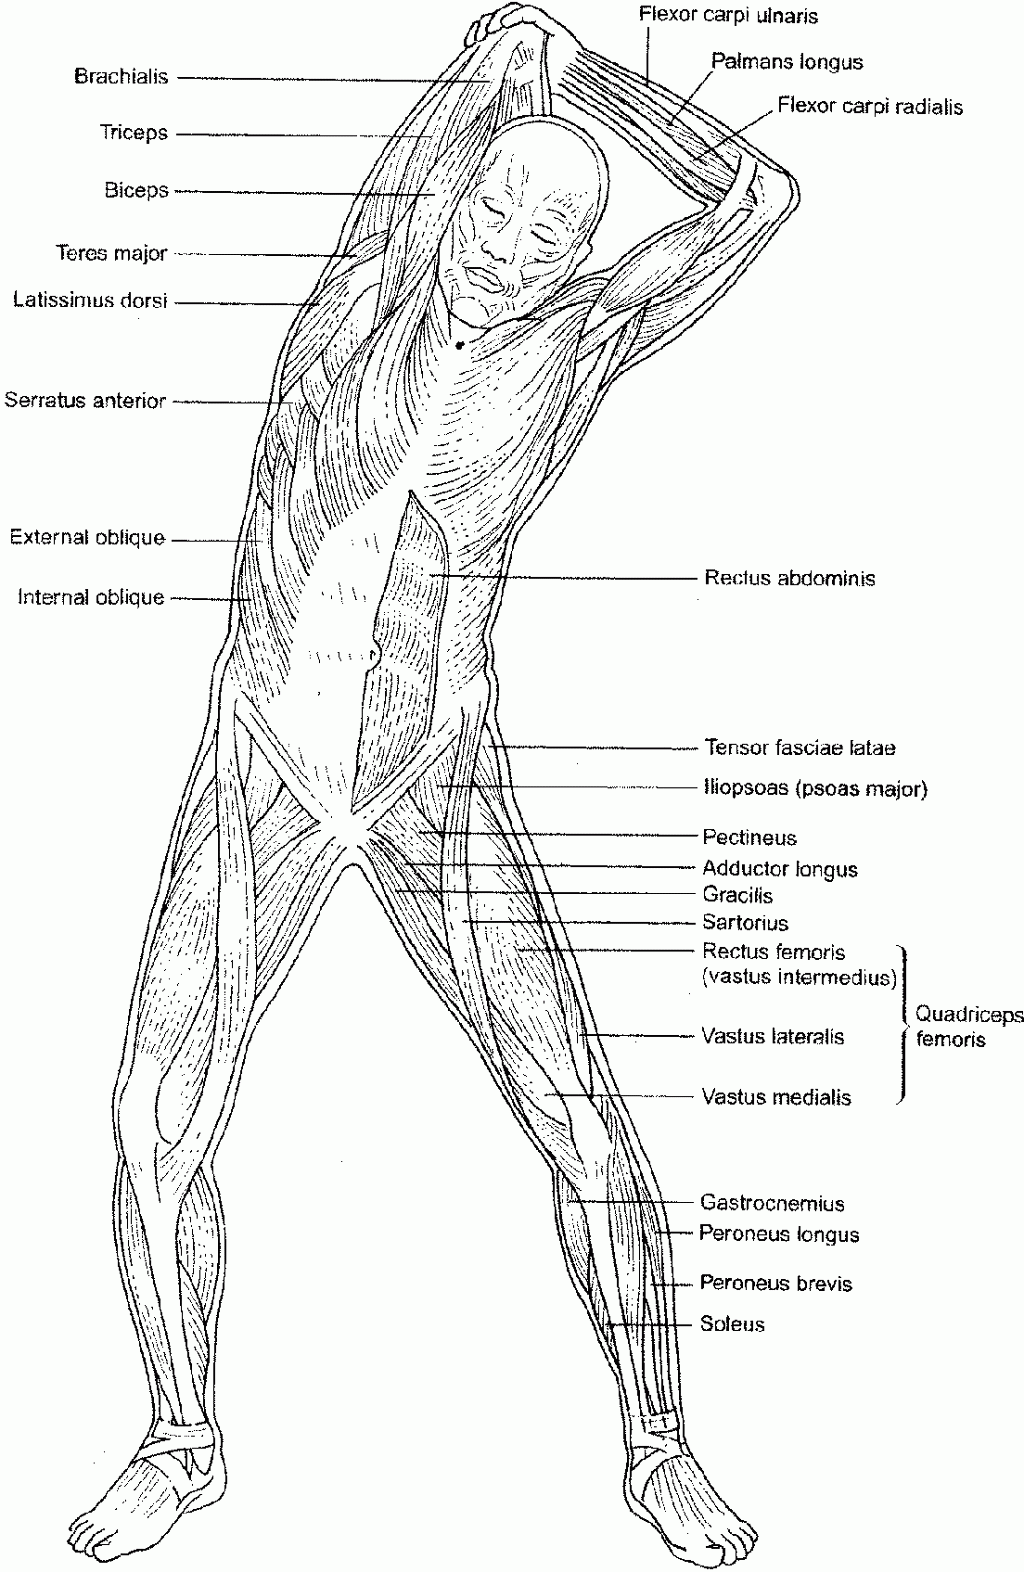 anatomy-coloring-pages-13 - ColoringPagehub